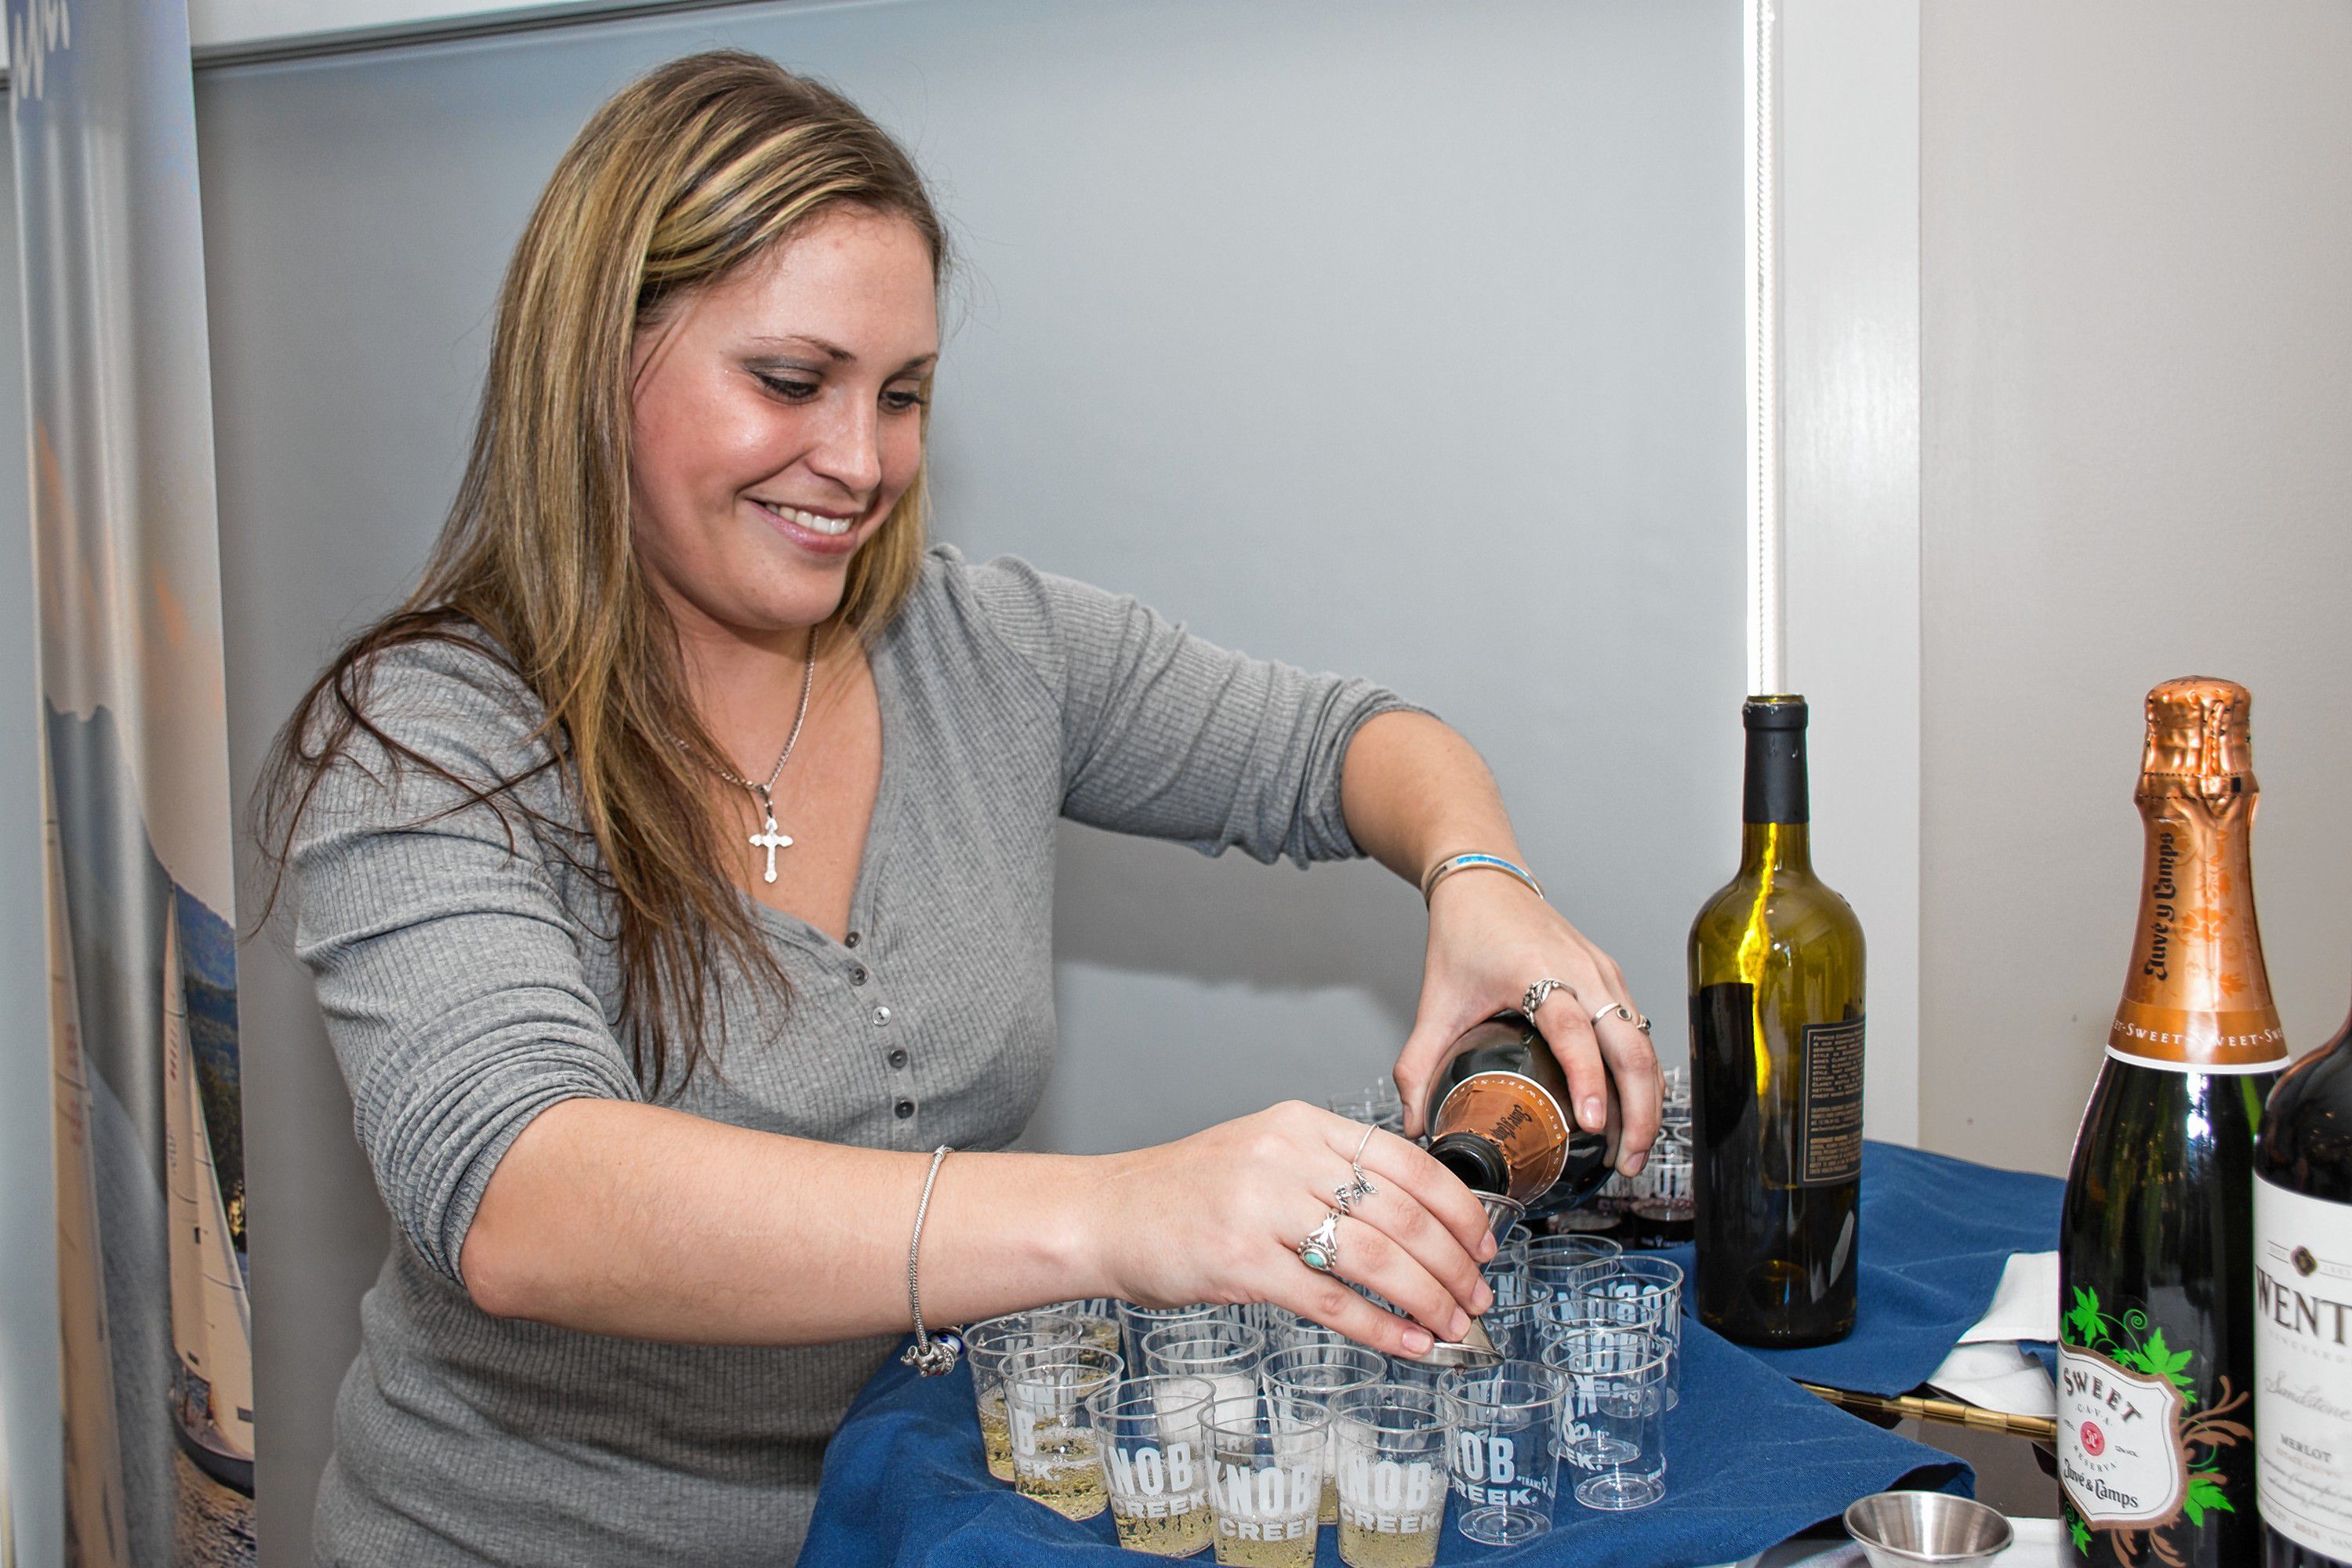 Stepahnie Cataldo, formerly from Peabody MA, works for Southern Glazers Wine and Spirits who provided wines for the chocolate and wine pairings. Nancy Nutile-McMenemy photograph